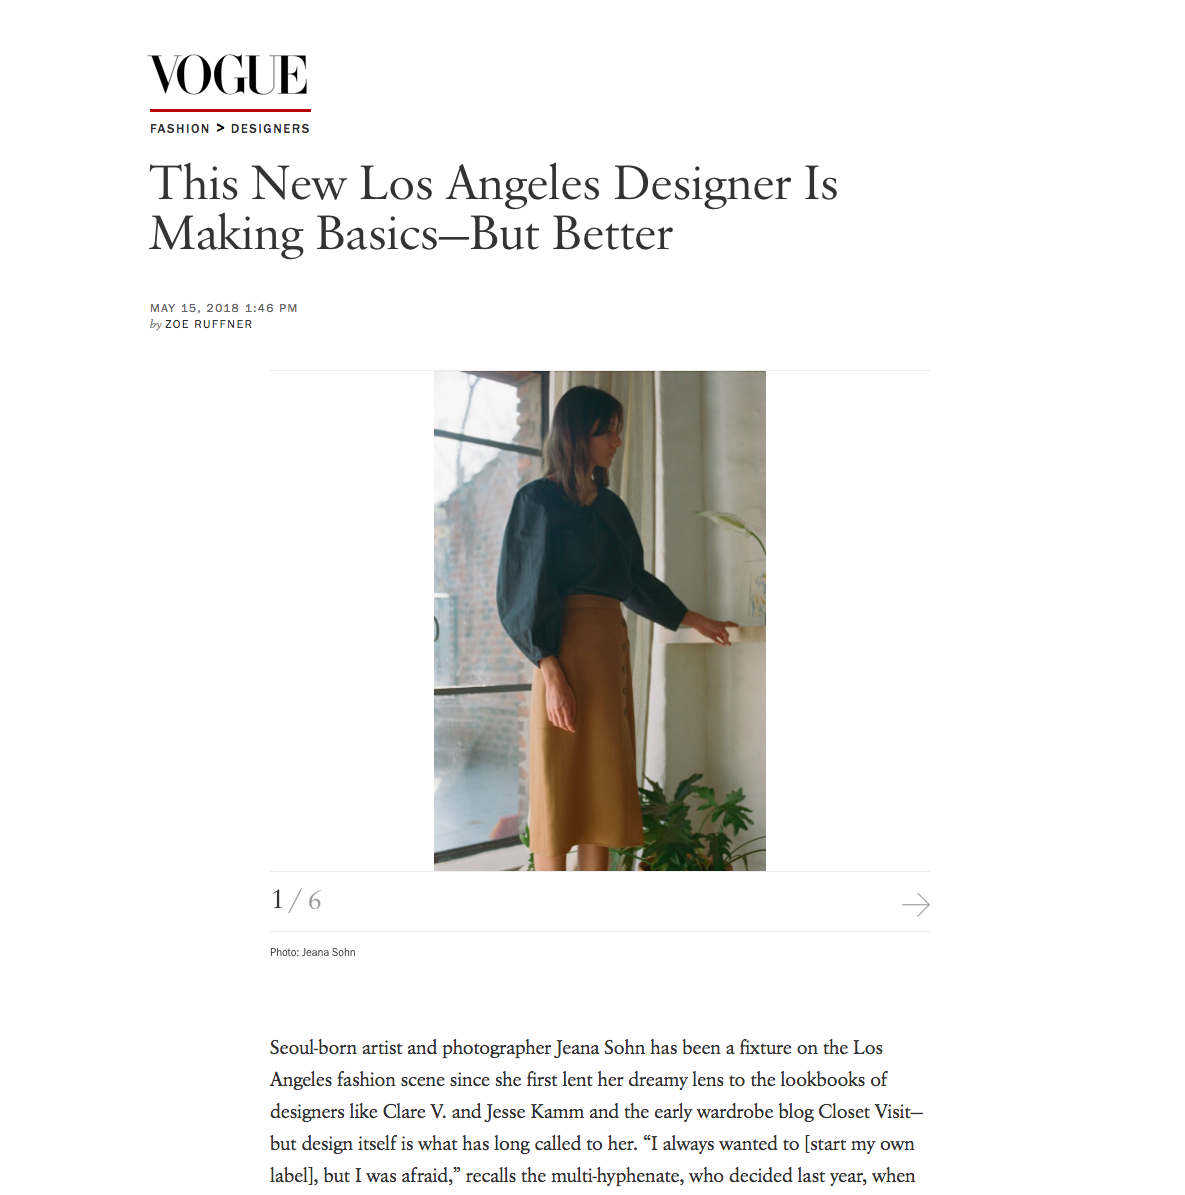 Vogue - This New Los Angeles Designer Is Making Basics - But Better